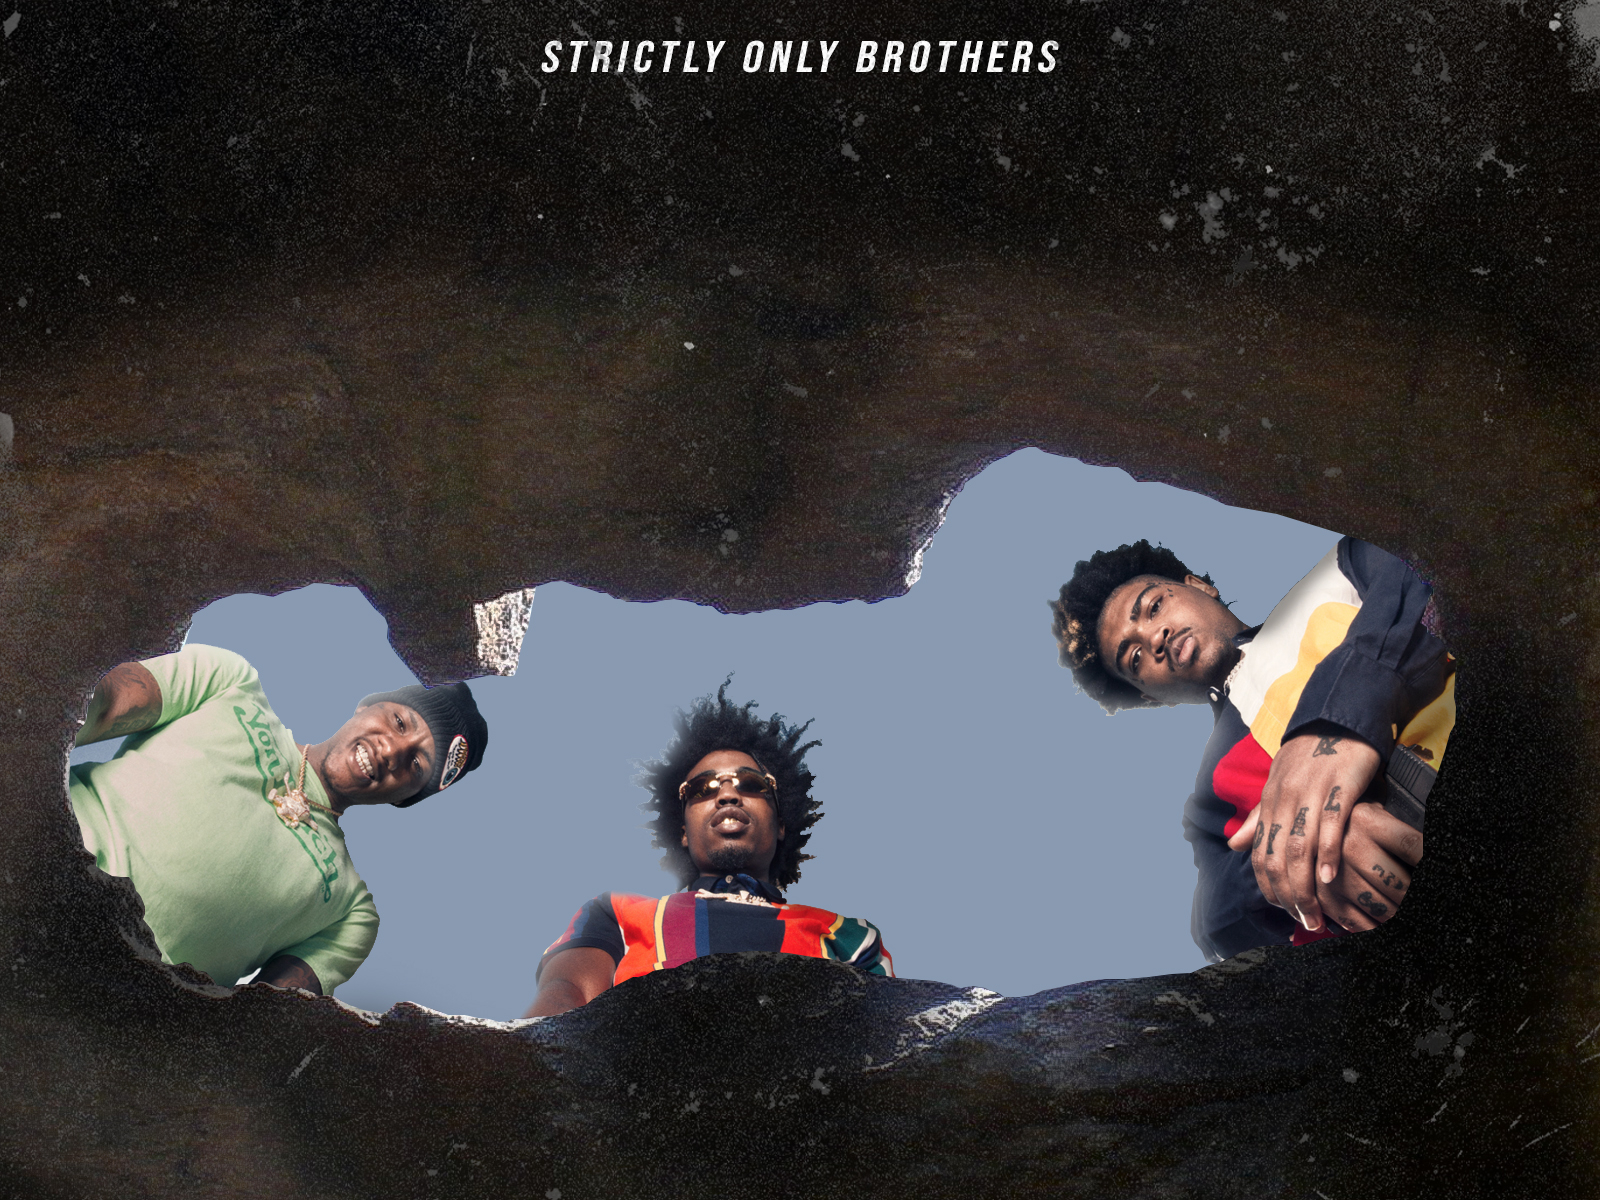 STRICTLY ONLY BROTHERS - SOB X RBE by